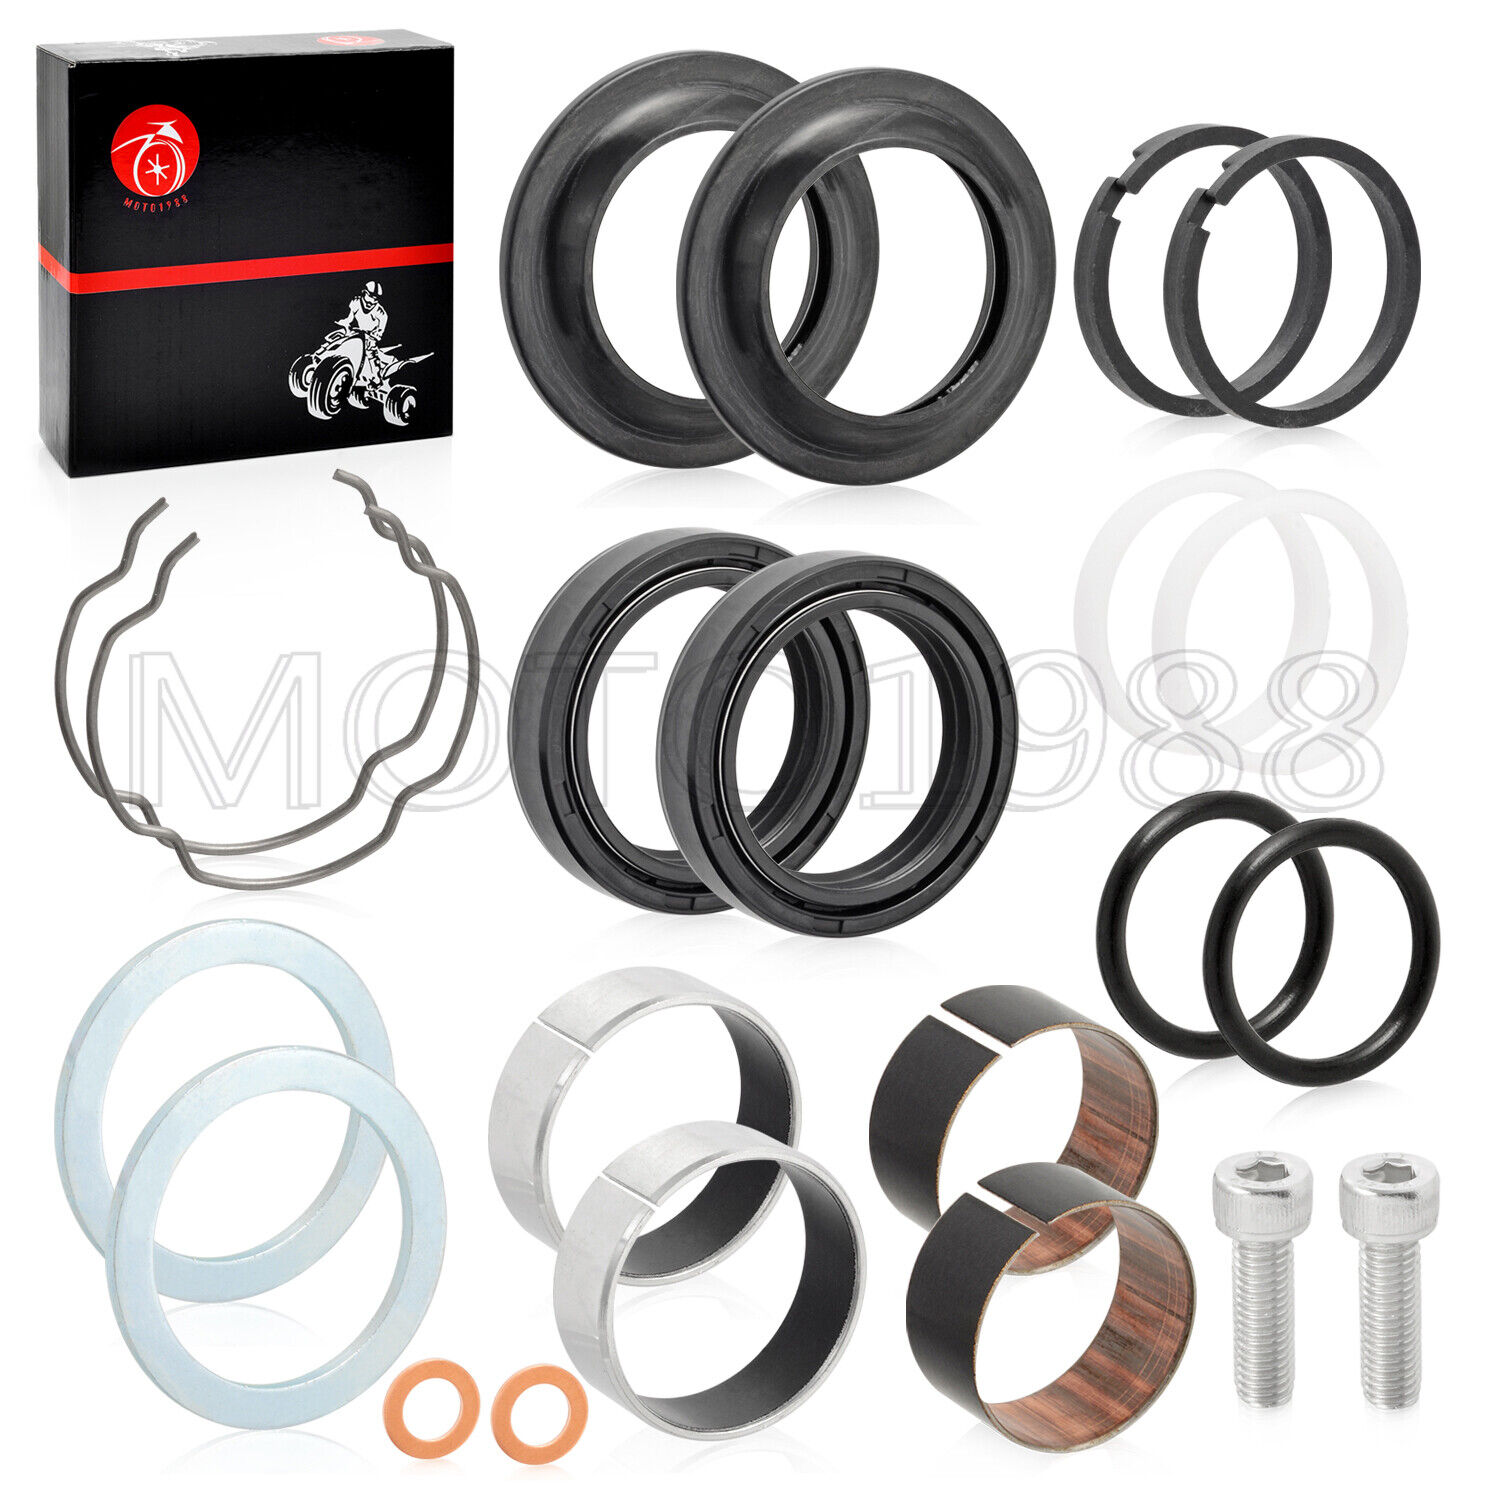 39mm Front Fork Bushing Dust Oil Seals For Sportster 883 1200 XL883 XL1200 90-13